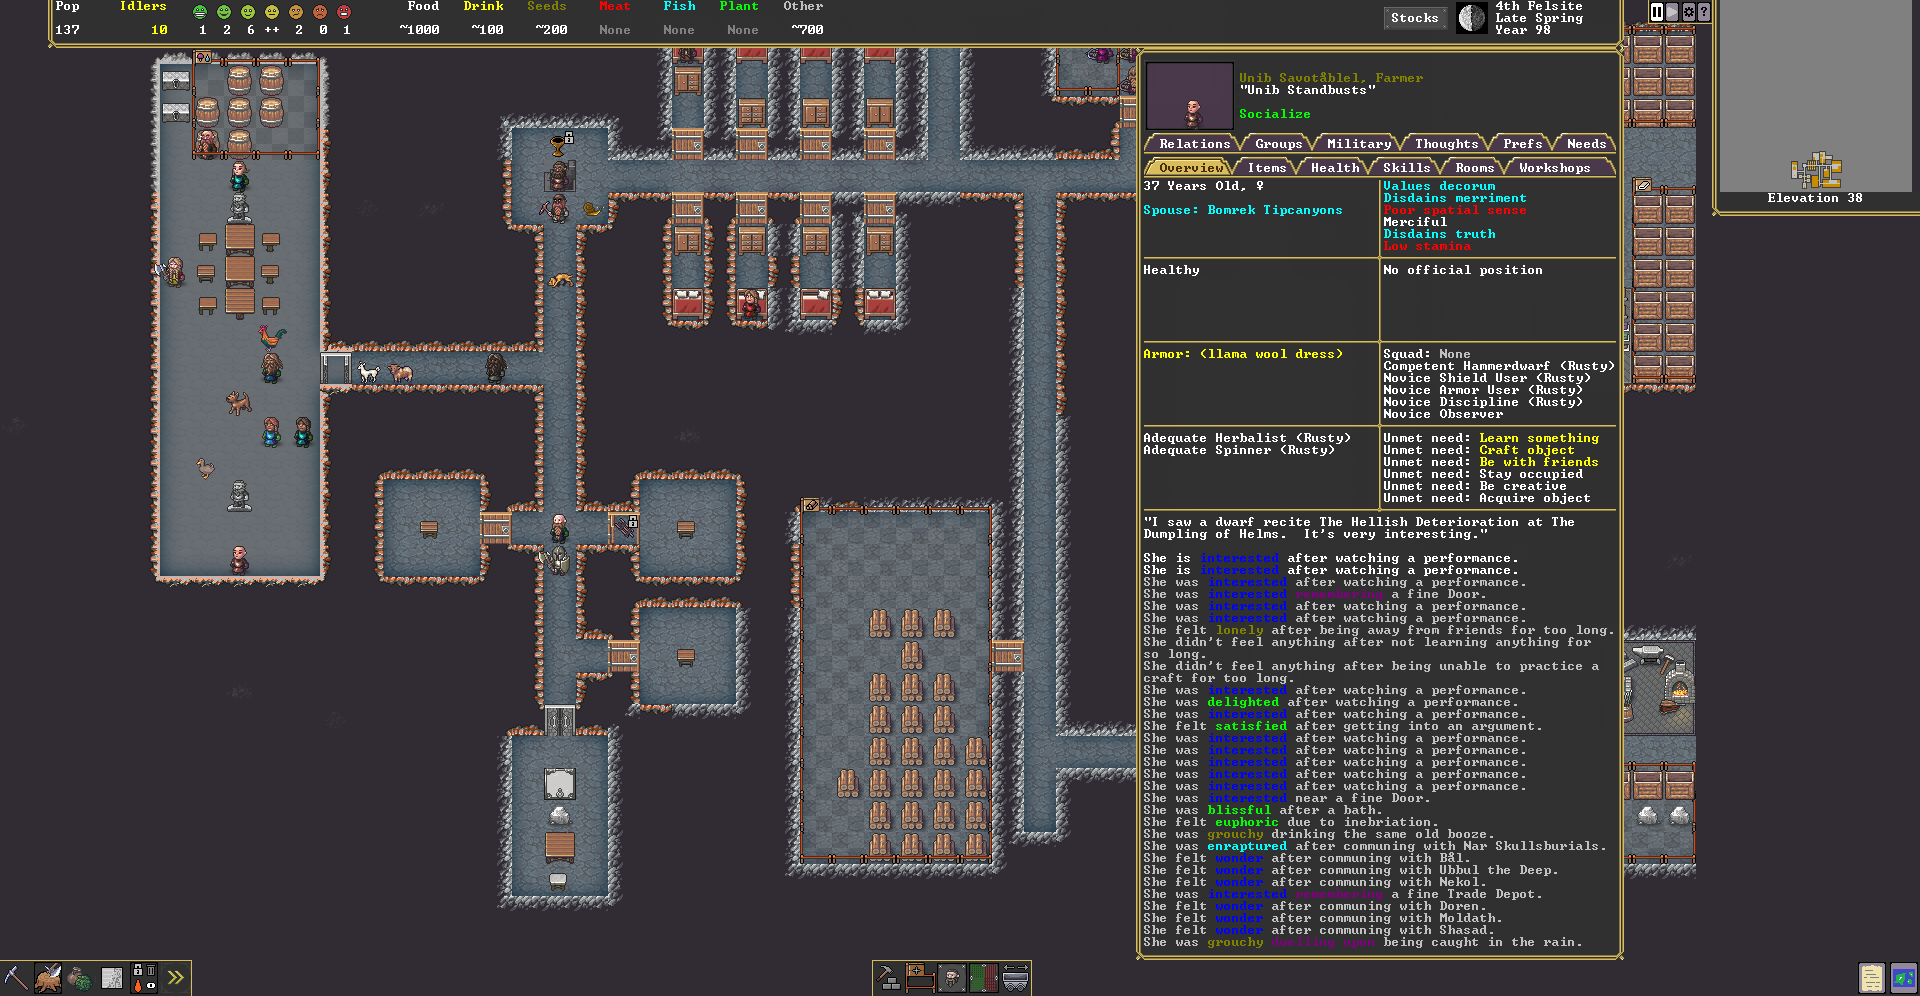 in-progress image of the upcoming graphical version of Dwarf Fortress.